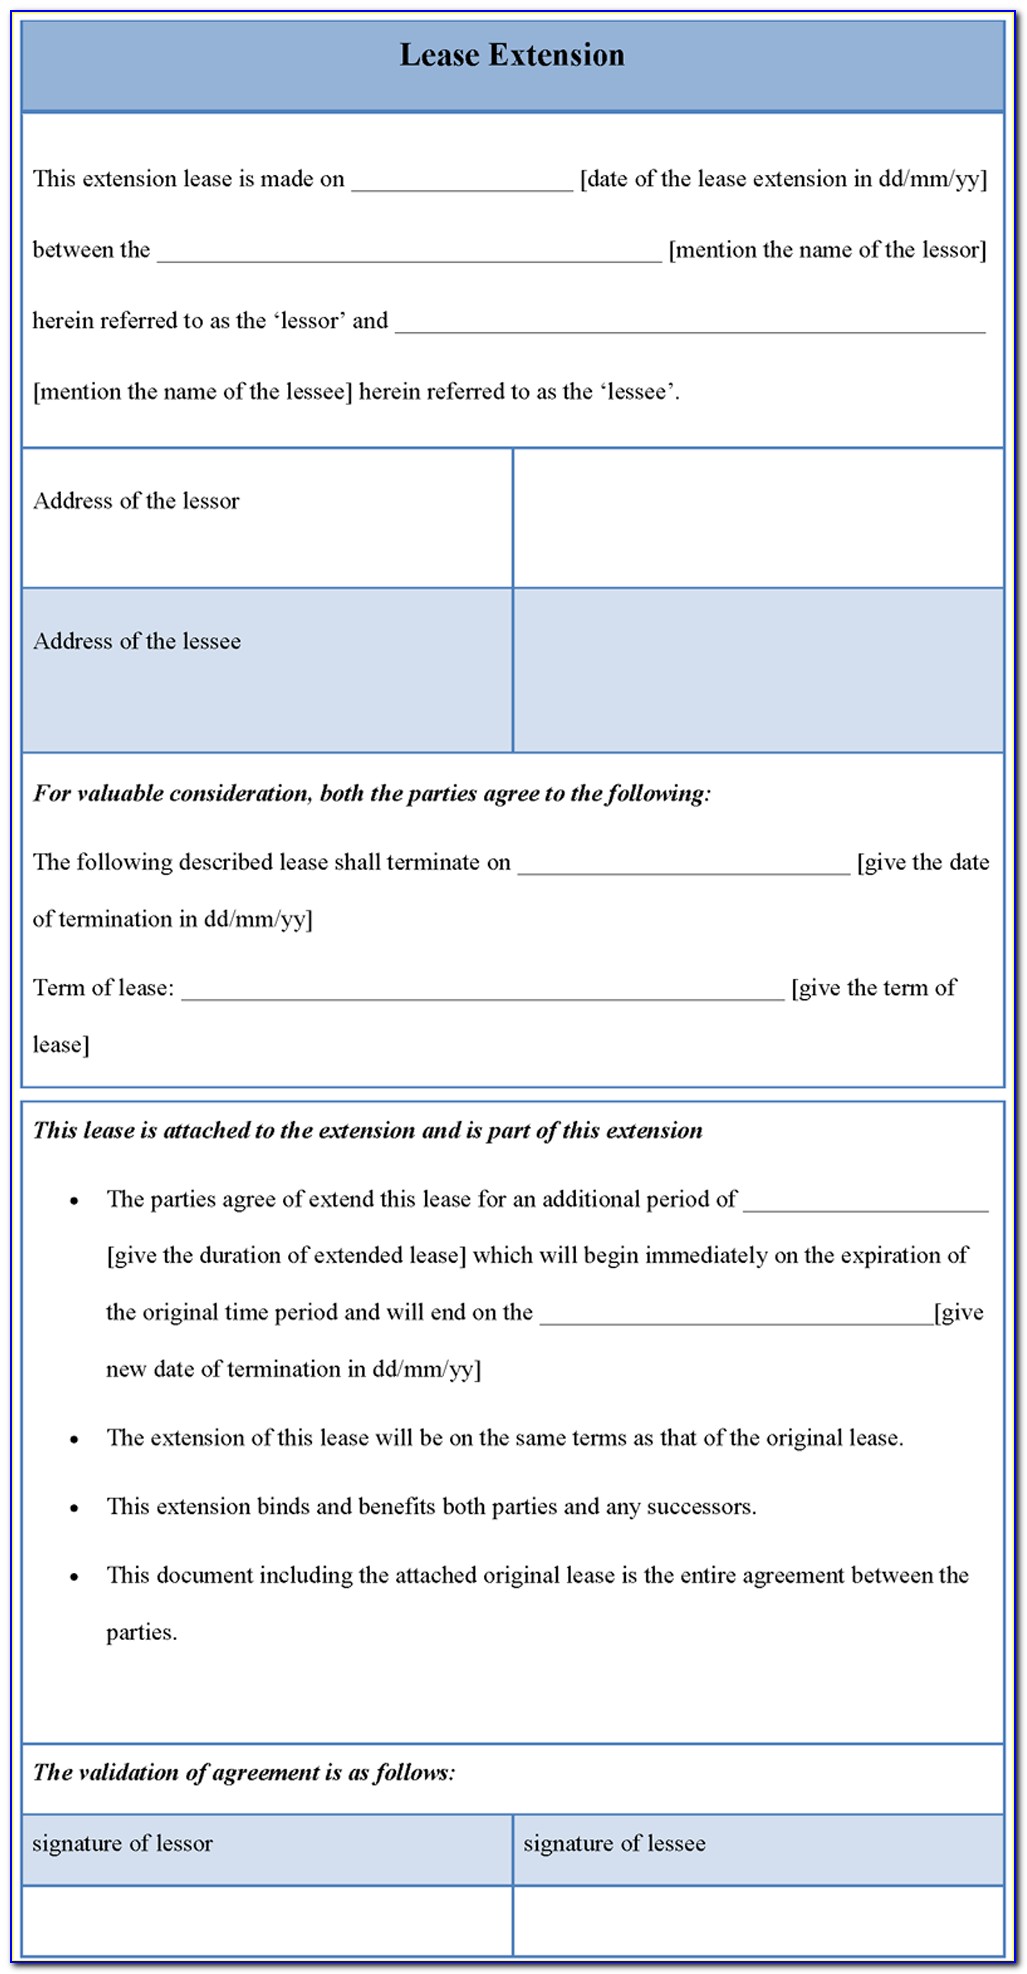 Standard Commercial Lease Agreement Template South Africa